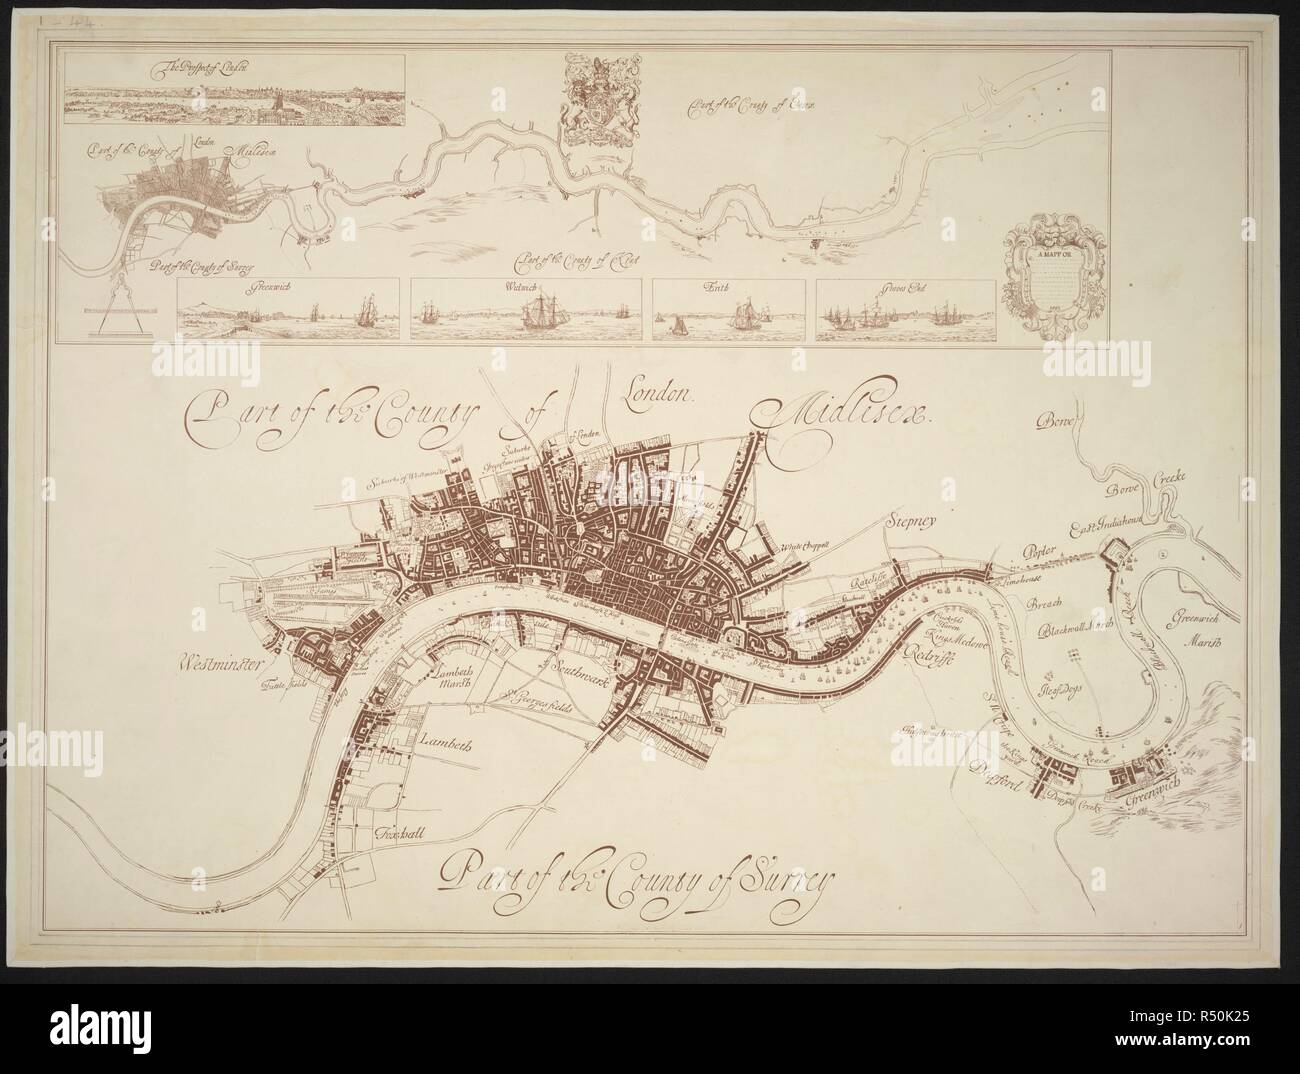 This map includes a small panorama of London and a plan of the Thames with scenic depictions of towns along the river, such as Greenwich. The main map is a plan of London showing East India House. Two maps of London and Thames Estuary. [Place of publication not identified] : [publisher not identified], [about 1850]. Lithograph. Source: Maps Crace Port.1.44. Language: English. Stock Photo